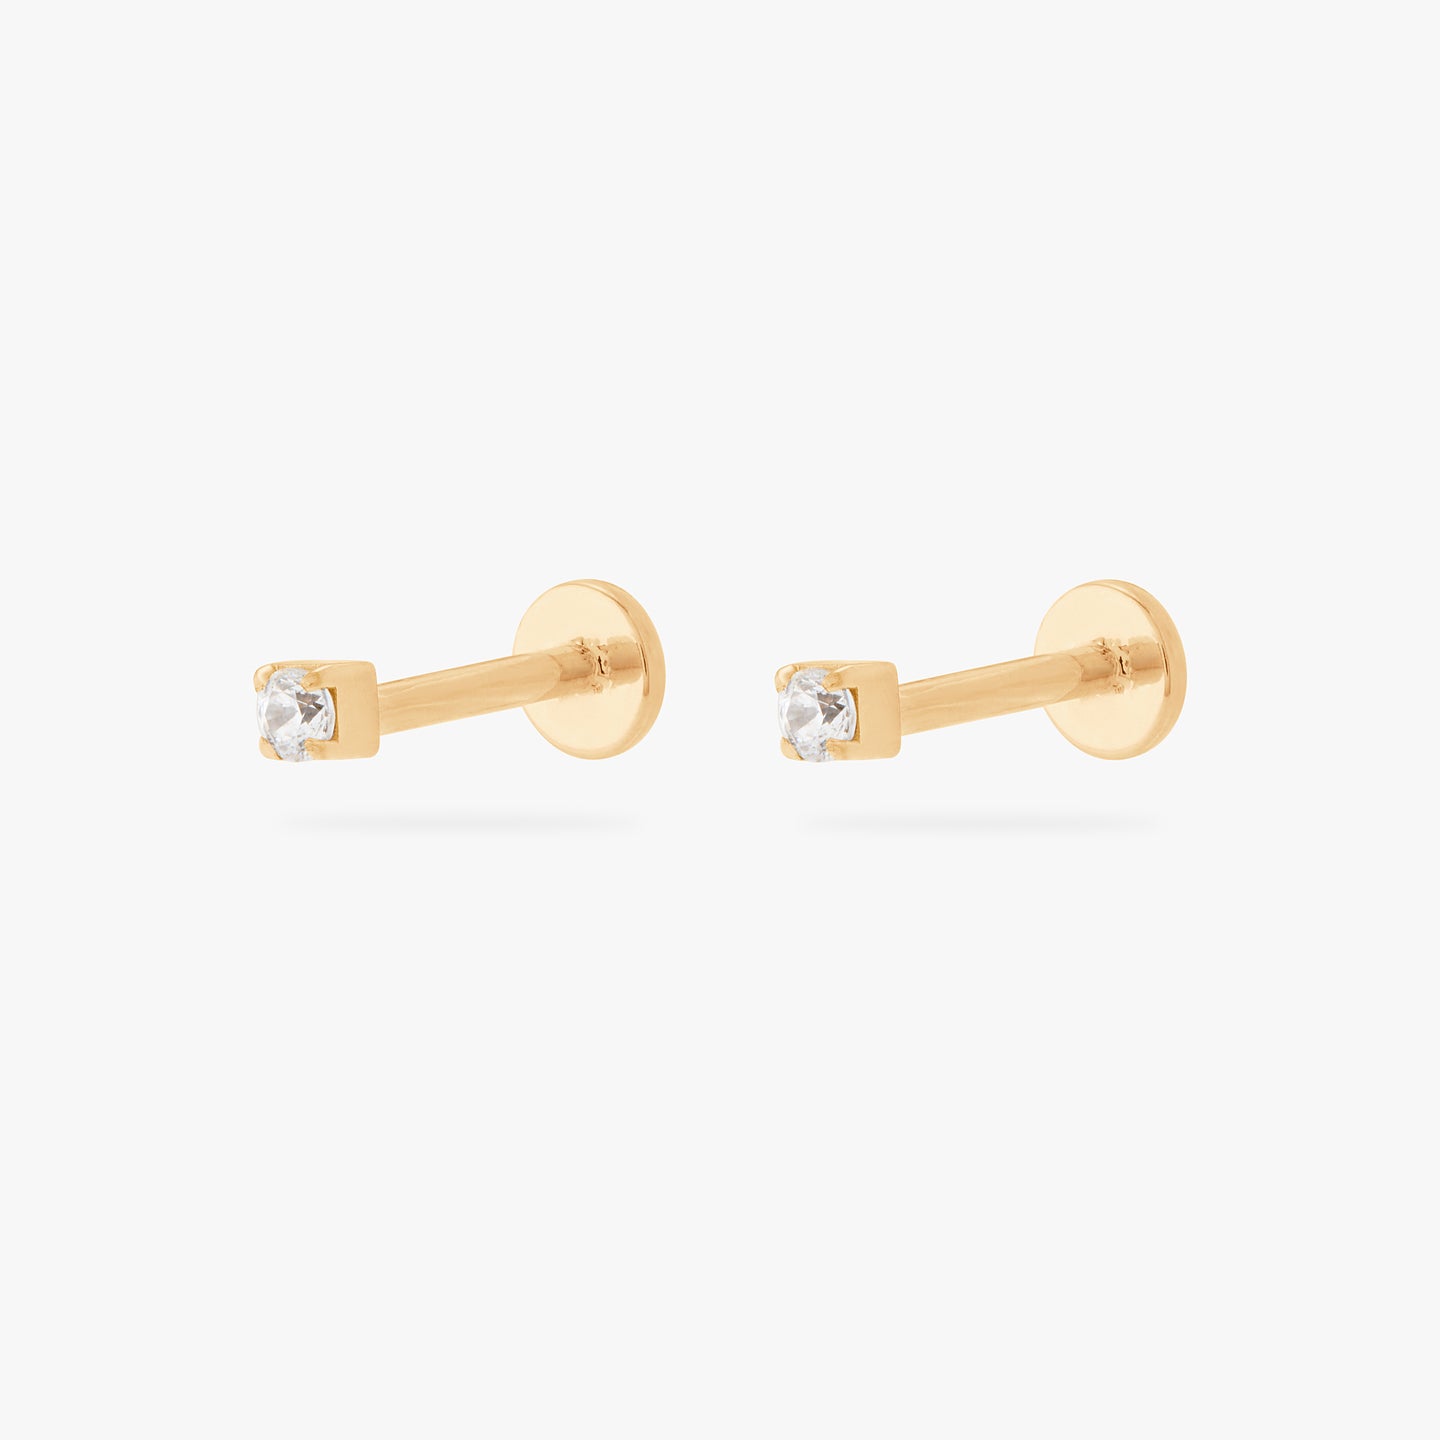 This is an image of a pair of gold/clear mini CZ flatback tops, with gold circle dics that are engraved with the 